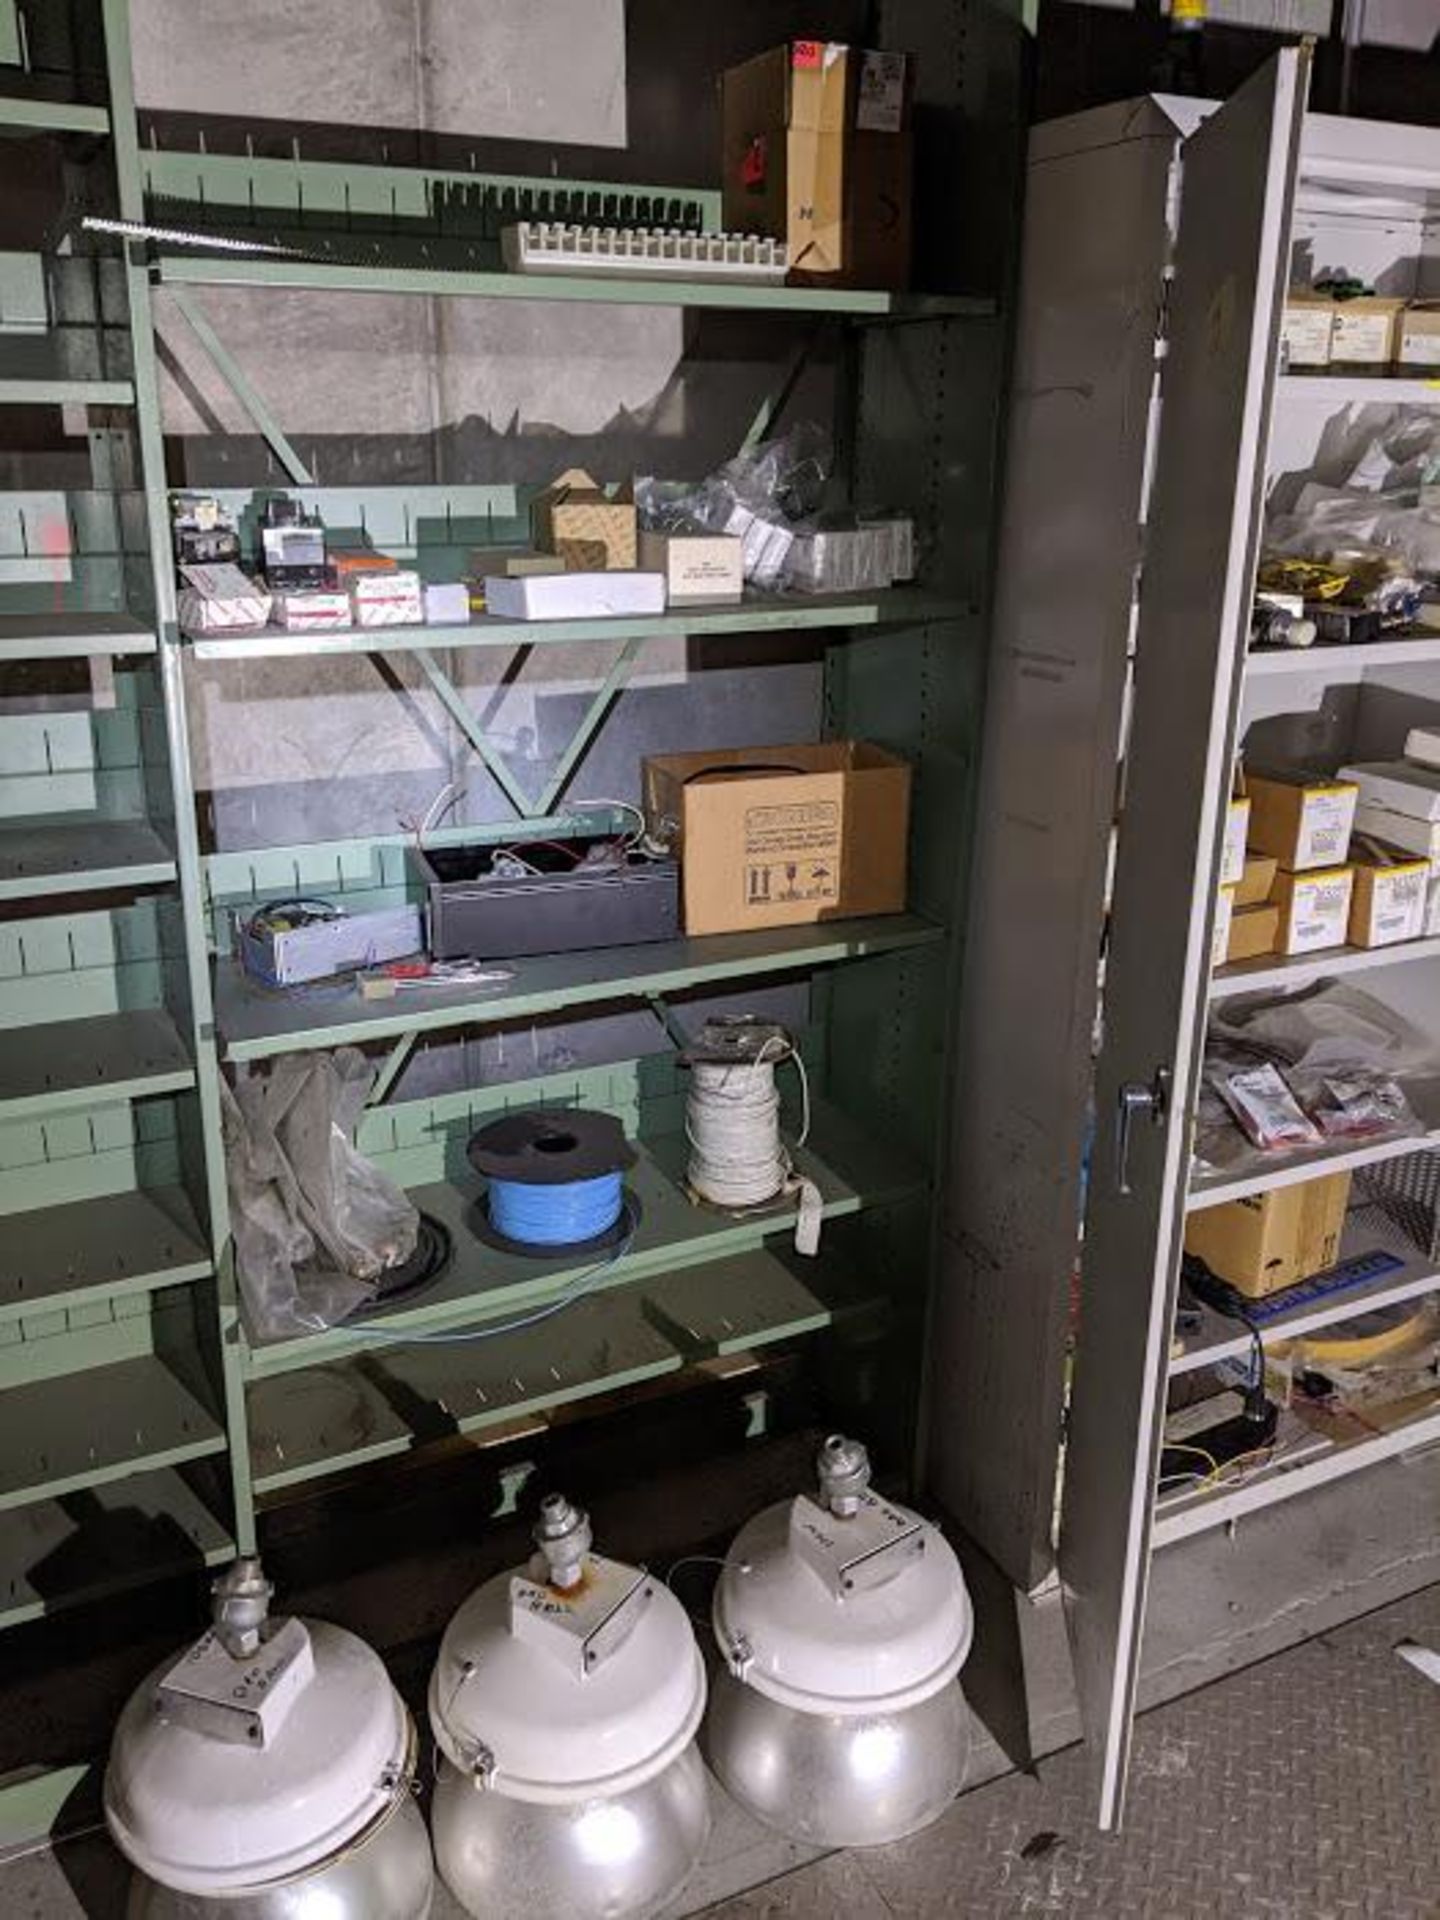 FACILITY SPARE PARTS CABINET WITH CONTENTS AND GREEN SHELF CONTENTS